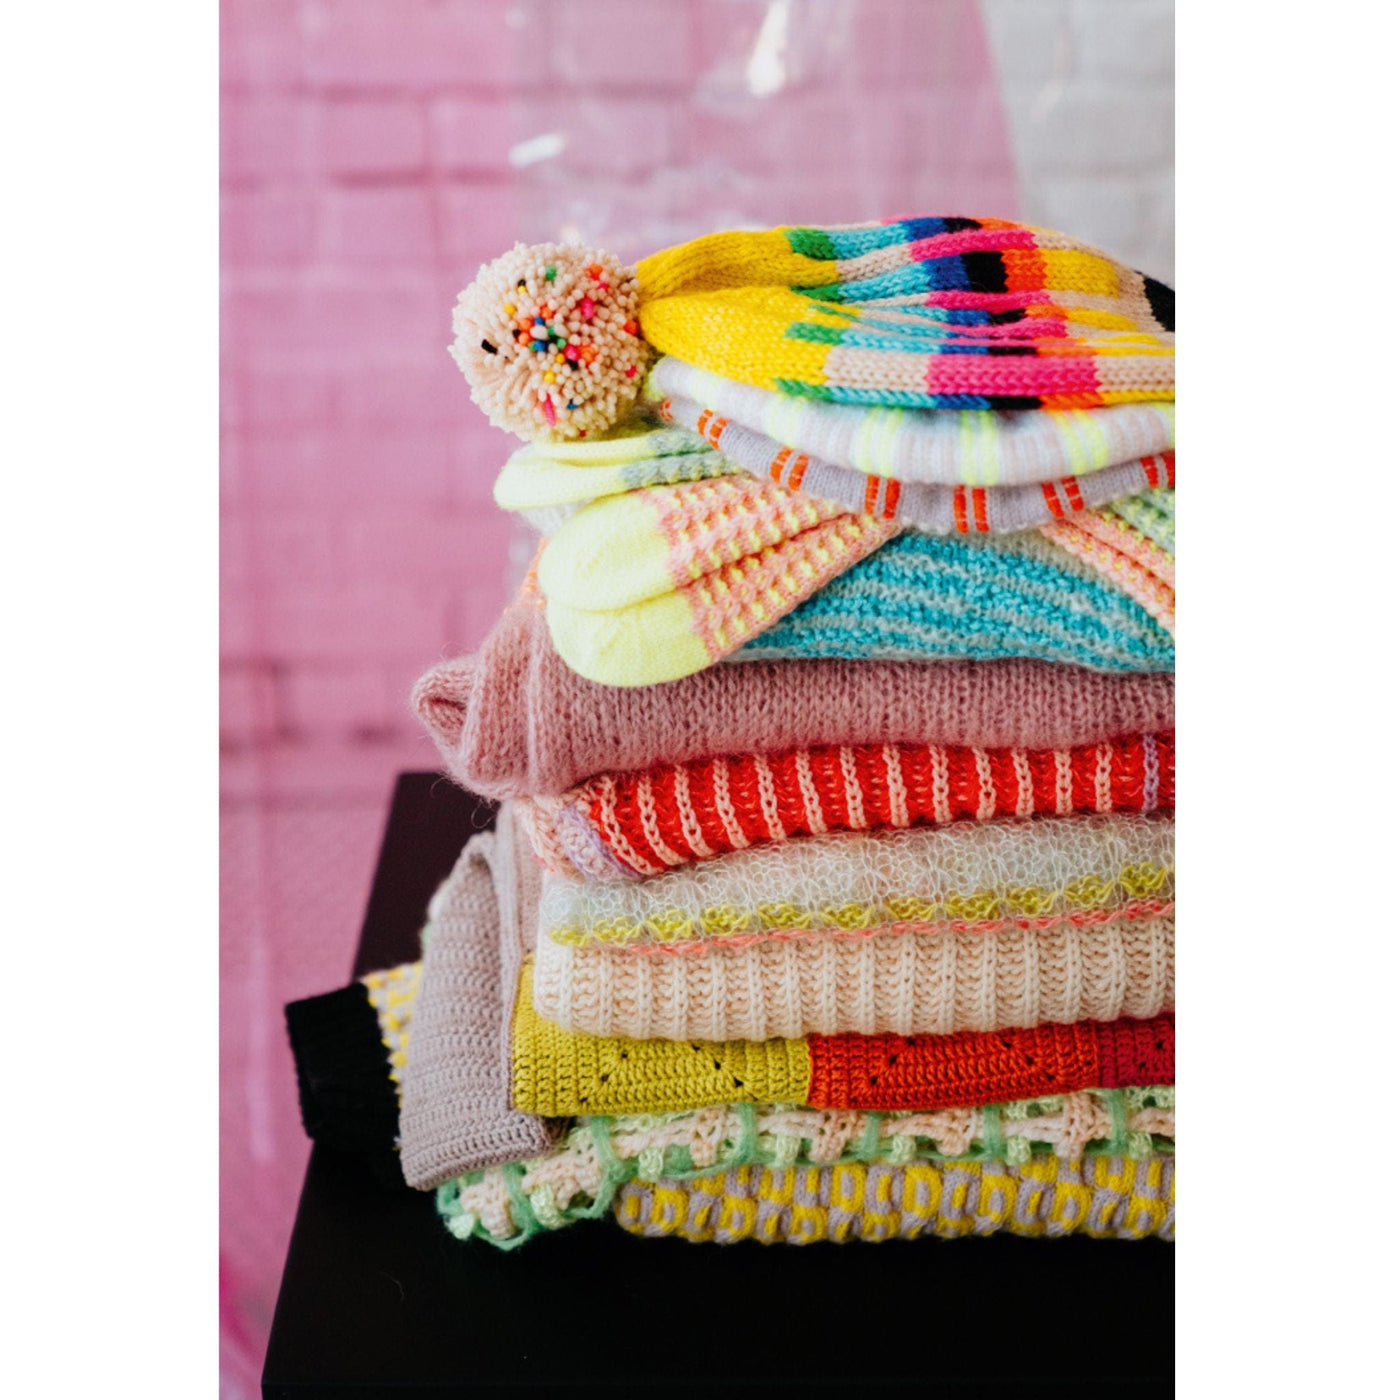 A beautiful pile of knitwear and crochet items featured in Pom Pom Issue 44. 